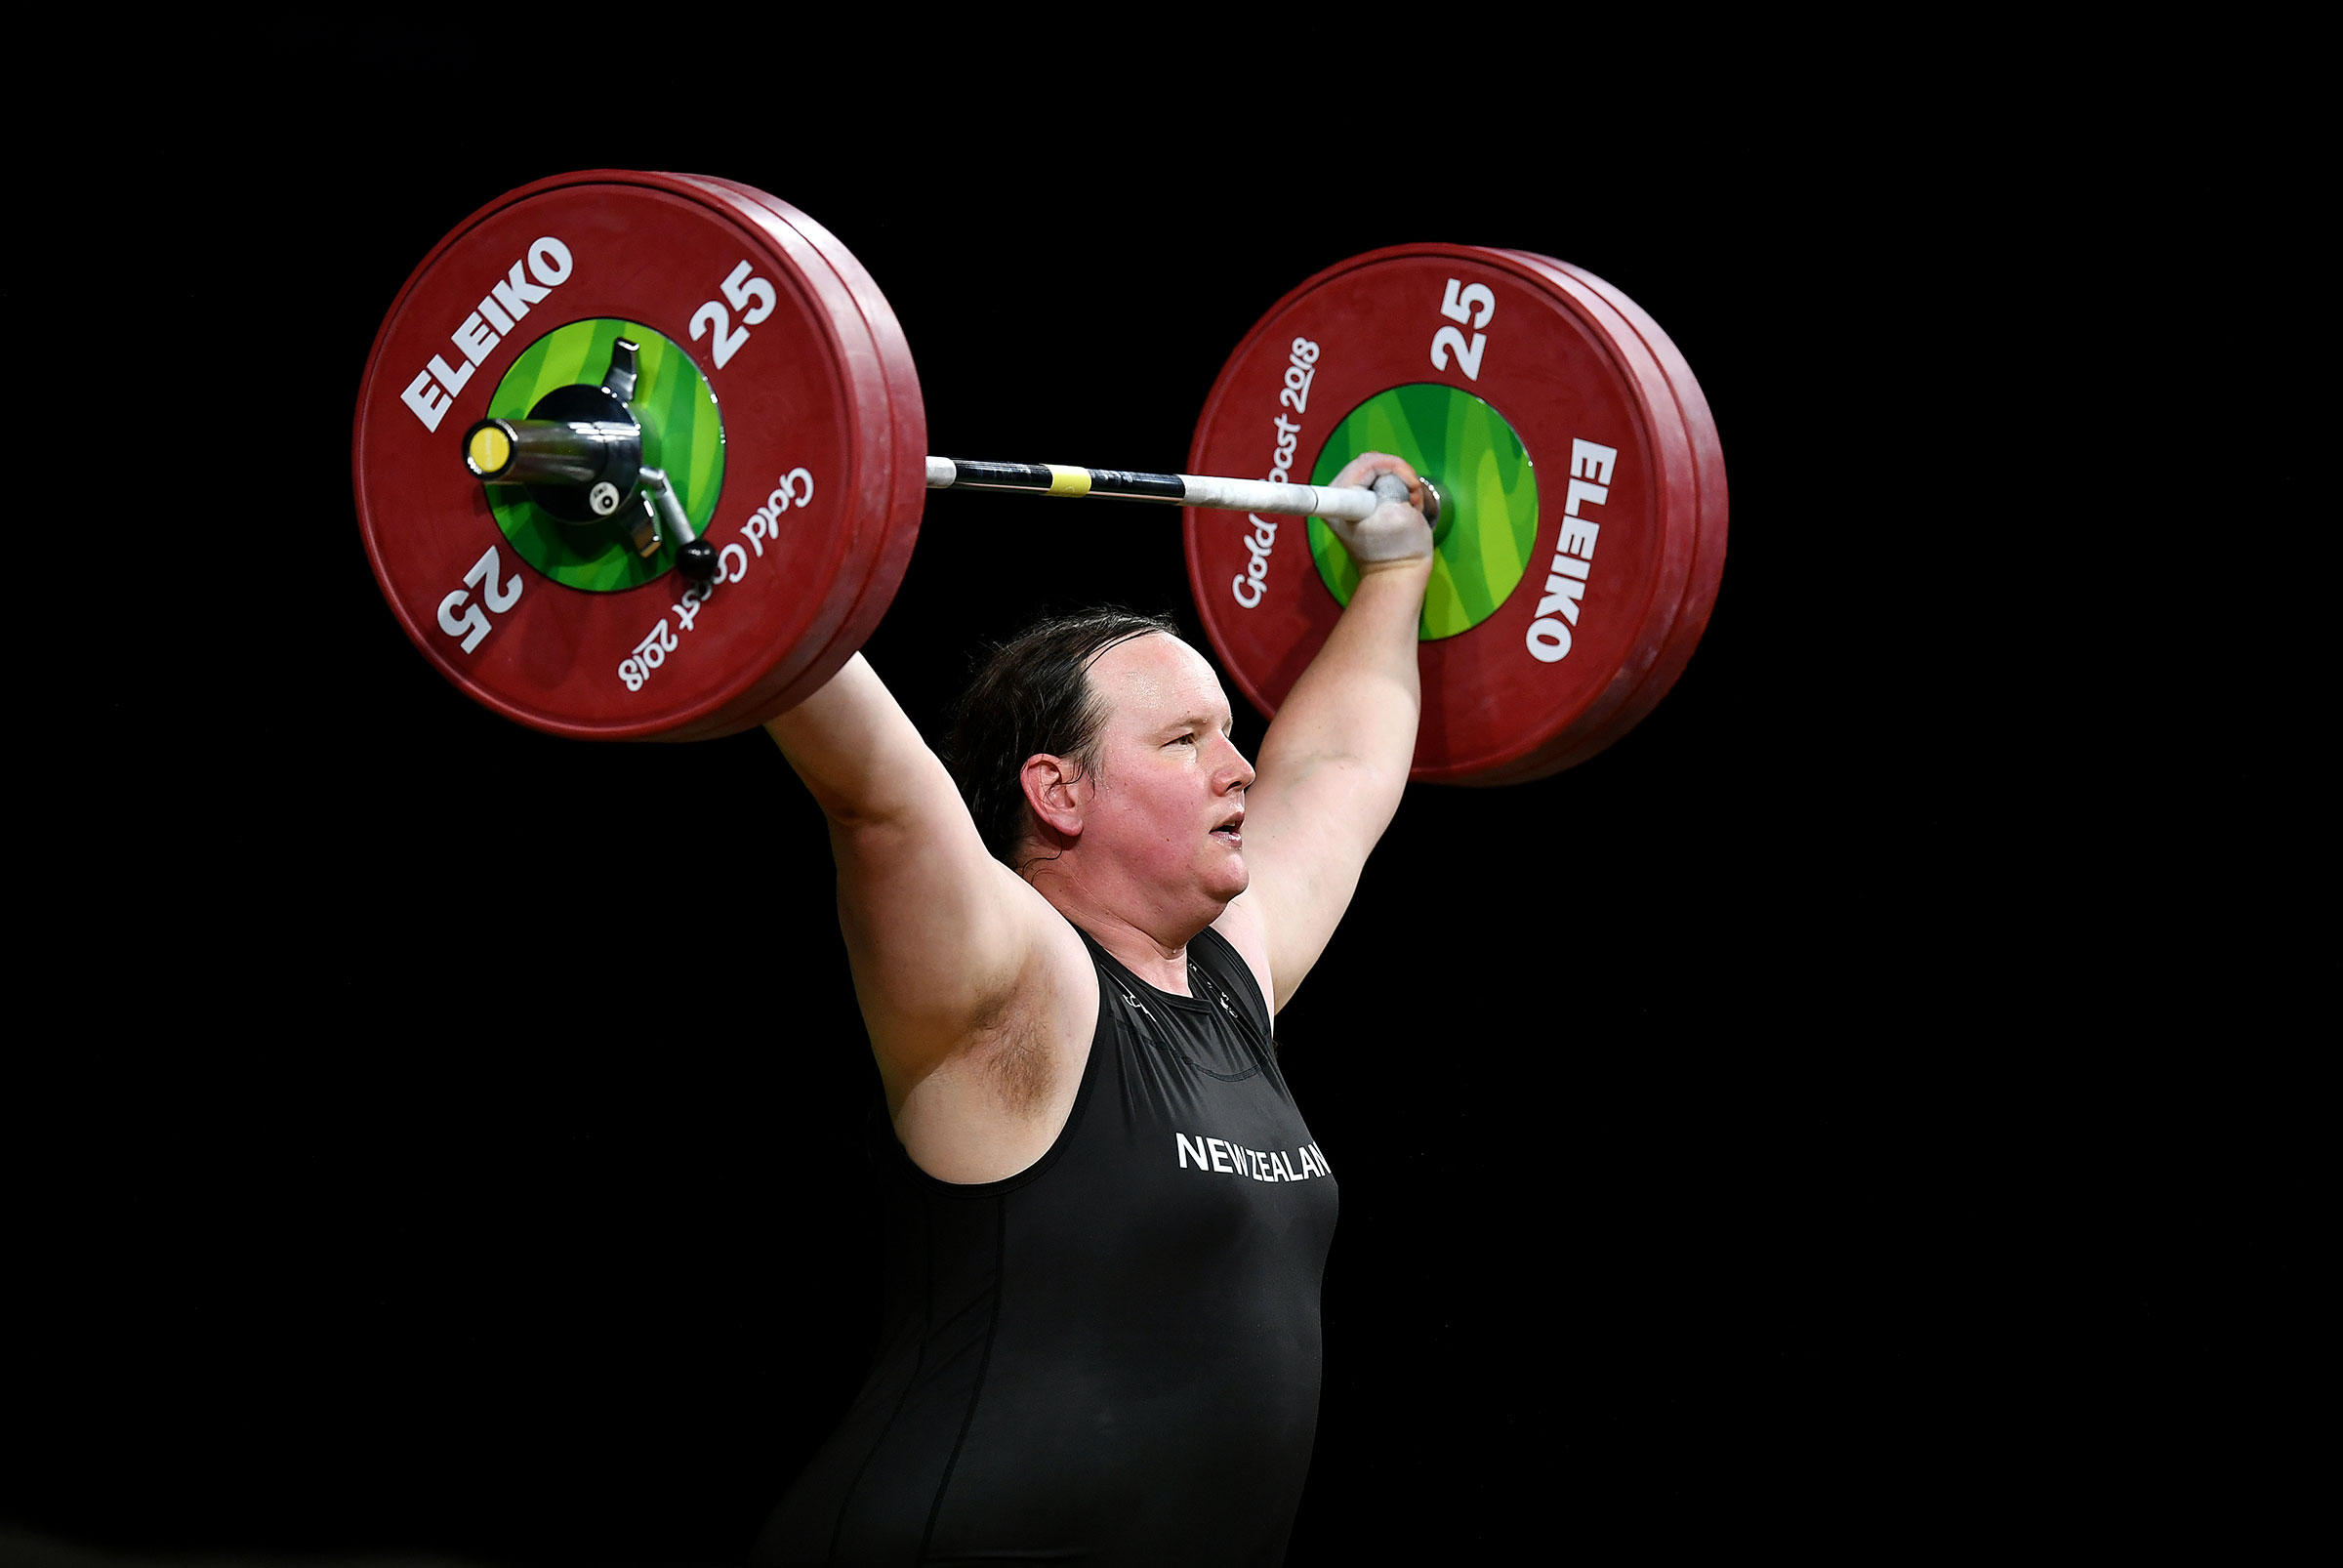 Laurel Hubbard of New Zealand competes in the Women's +90kg Weightlifting Final during the Gold Coast 2018 Commonwealth Games on April 9, 2018 on the Gold Coast, Australia.